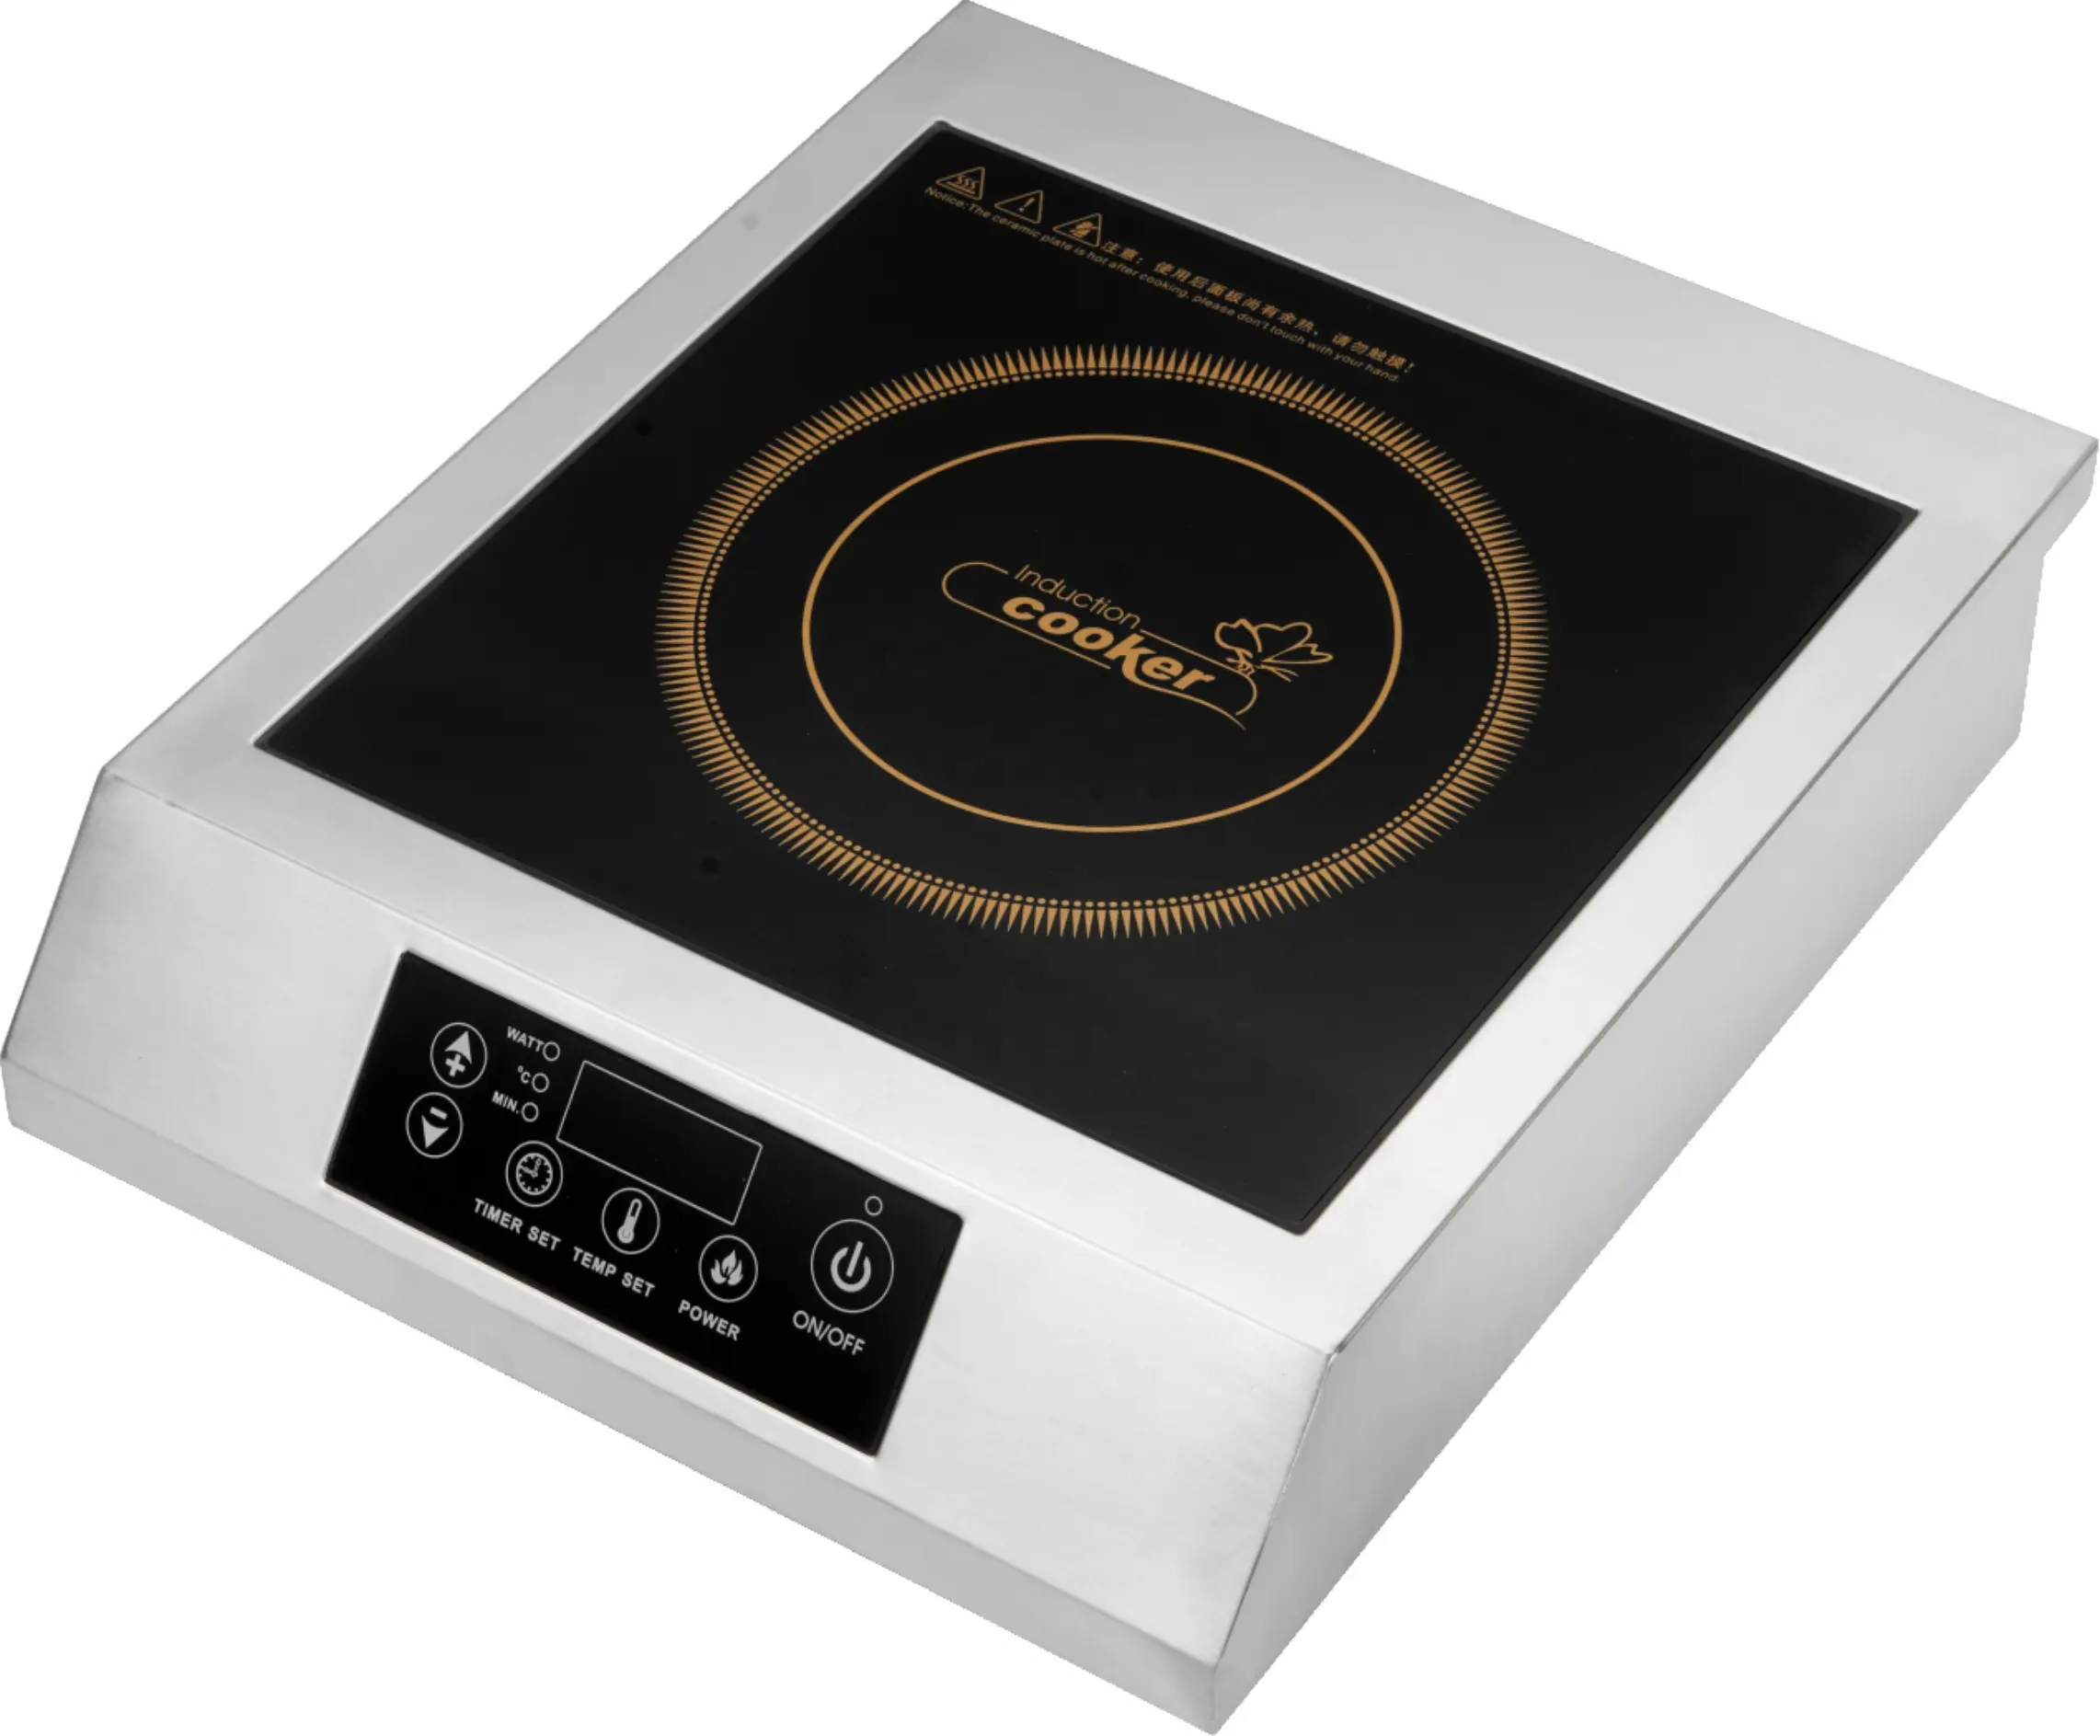 Newly launched induction cooker Home appliances induction cooktop button control electric stove cooker 3500W hot pot cooker